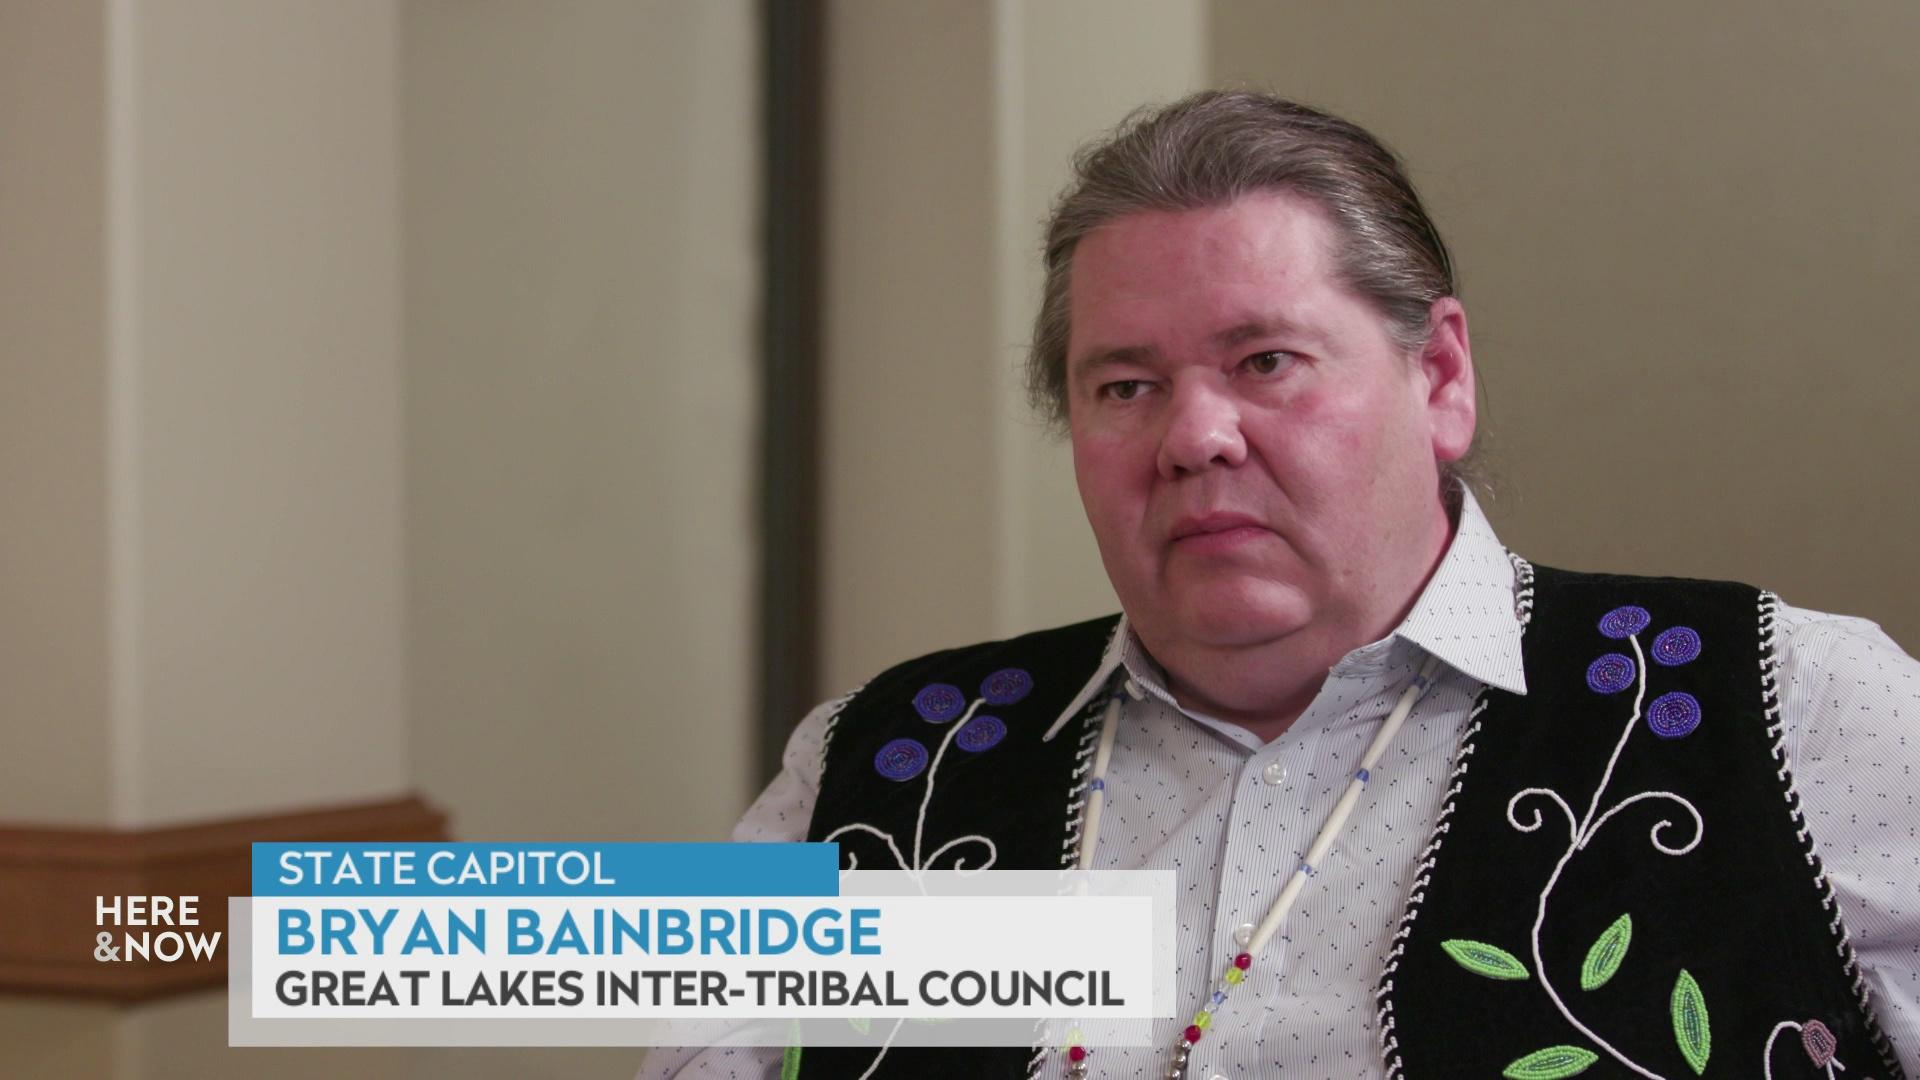 A still image from a video shows Bryan BainBridge seated in front of a tan wall with a graphic at bottom reading 'State Capitol,' 'Bryan BainBridge' and 'Great Lakes Inter-Tribal Council.'